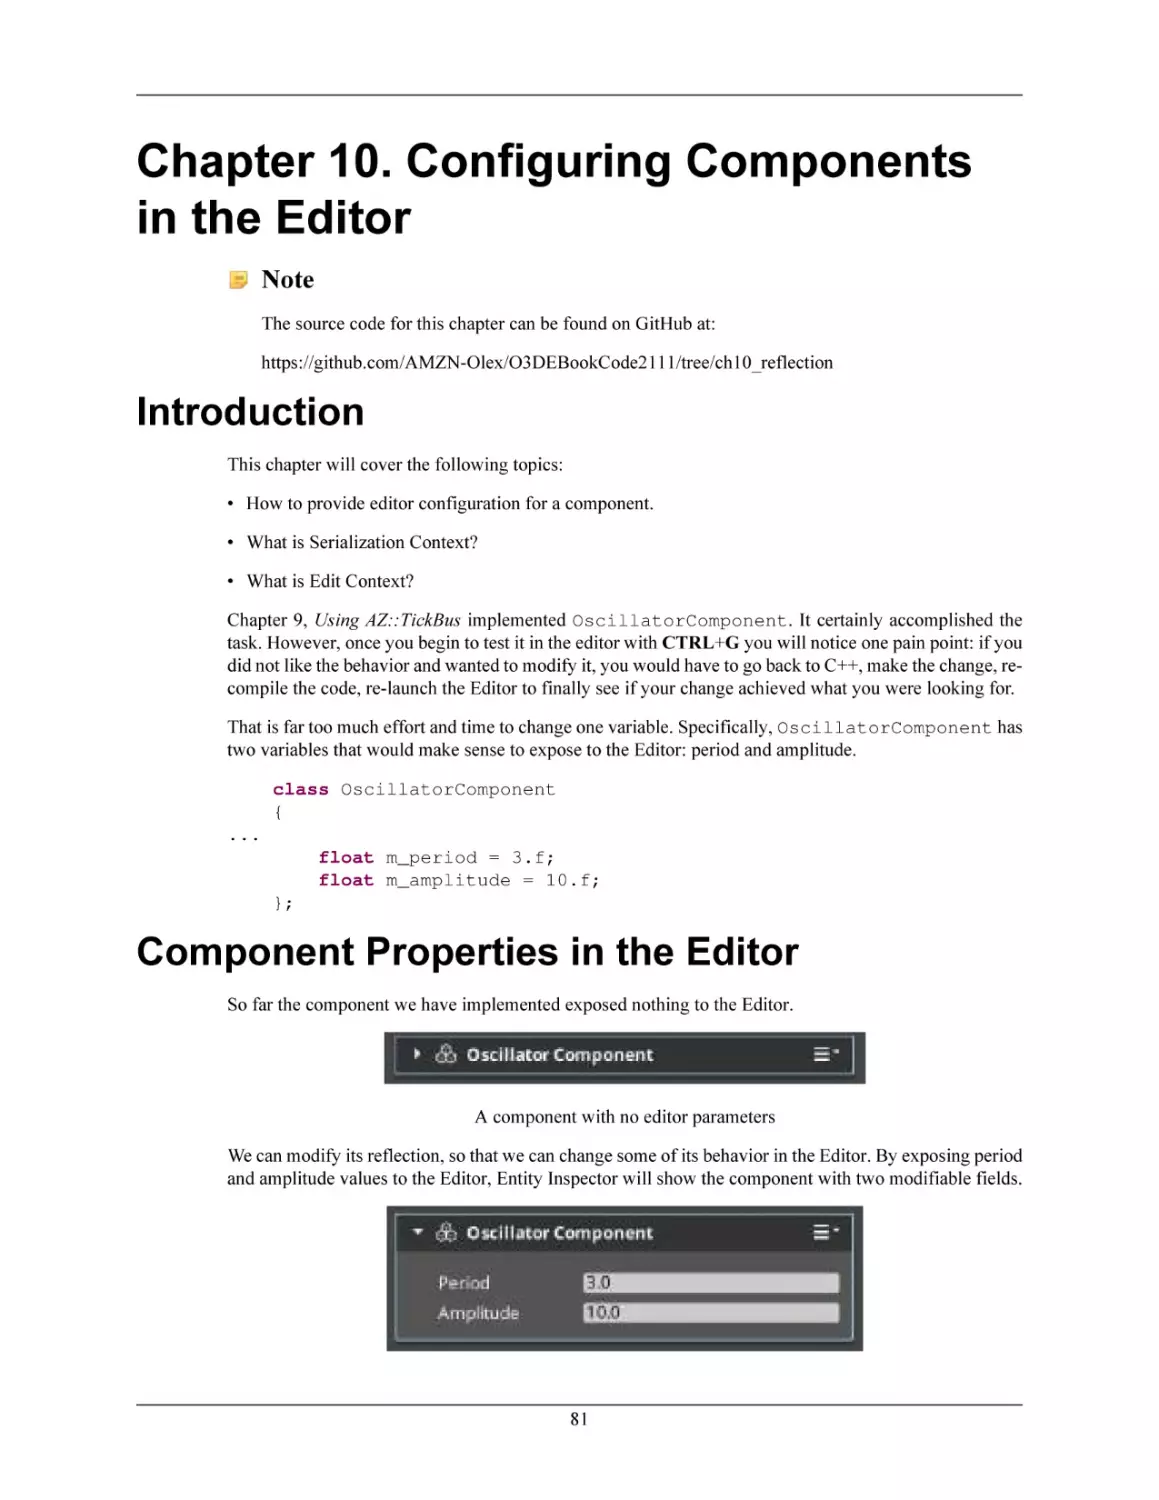 Chapter 10. Configuring Components in the Editor
Introduction
Component Properties in the Editor